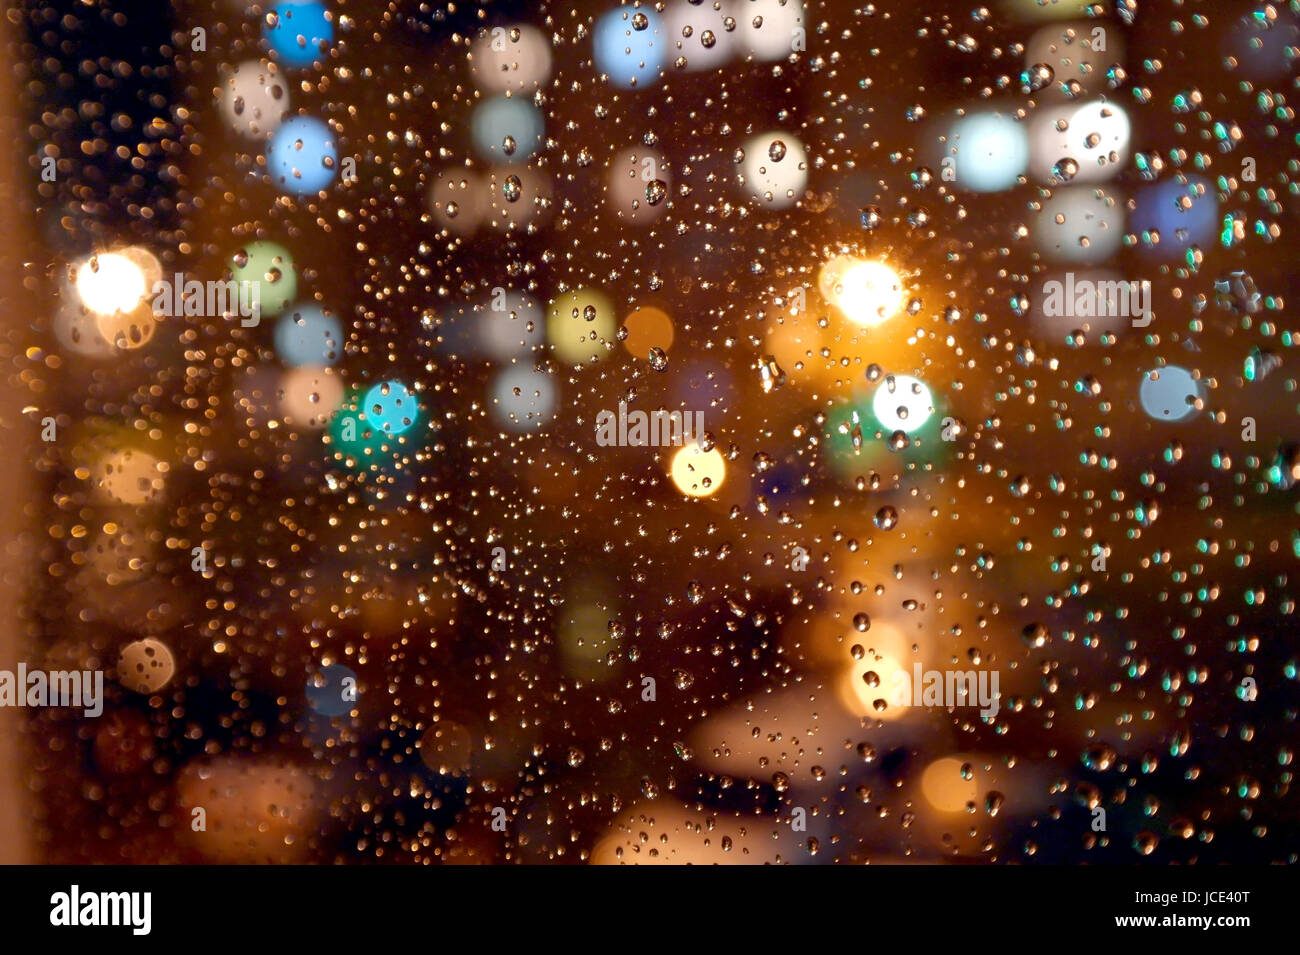 Drops of night rain on window, on back plan washed away lights of the torches. Shallow DOF Stock Photo